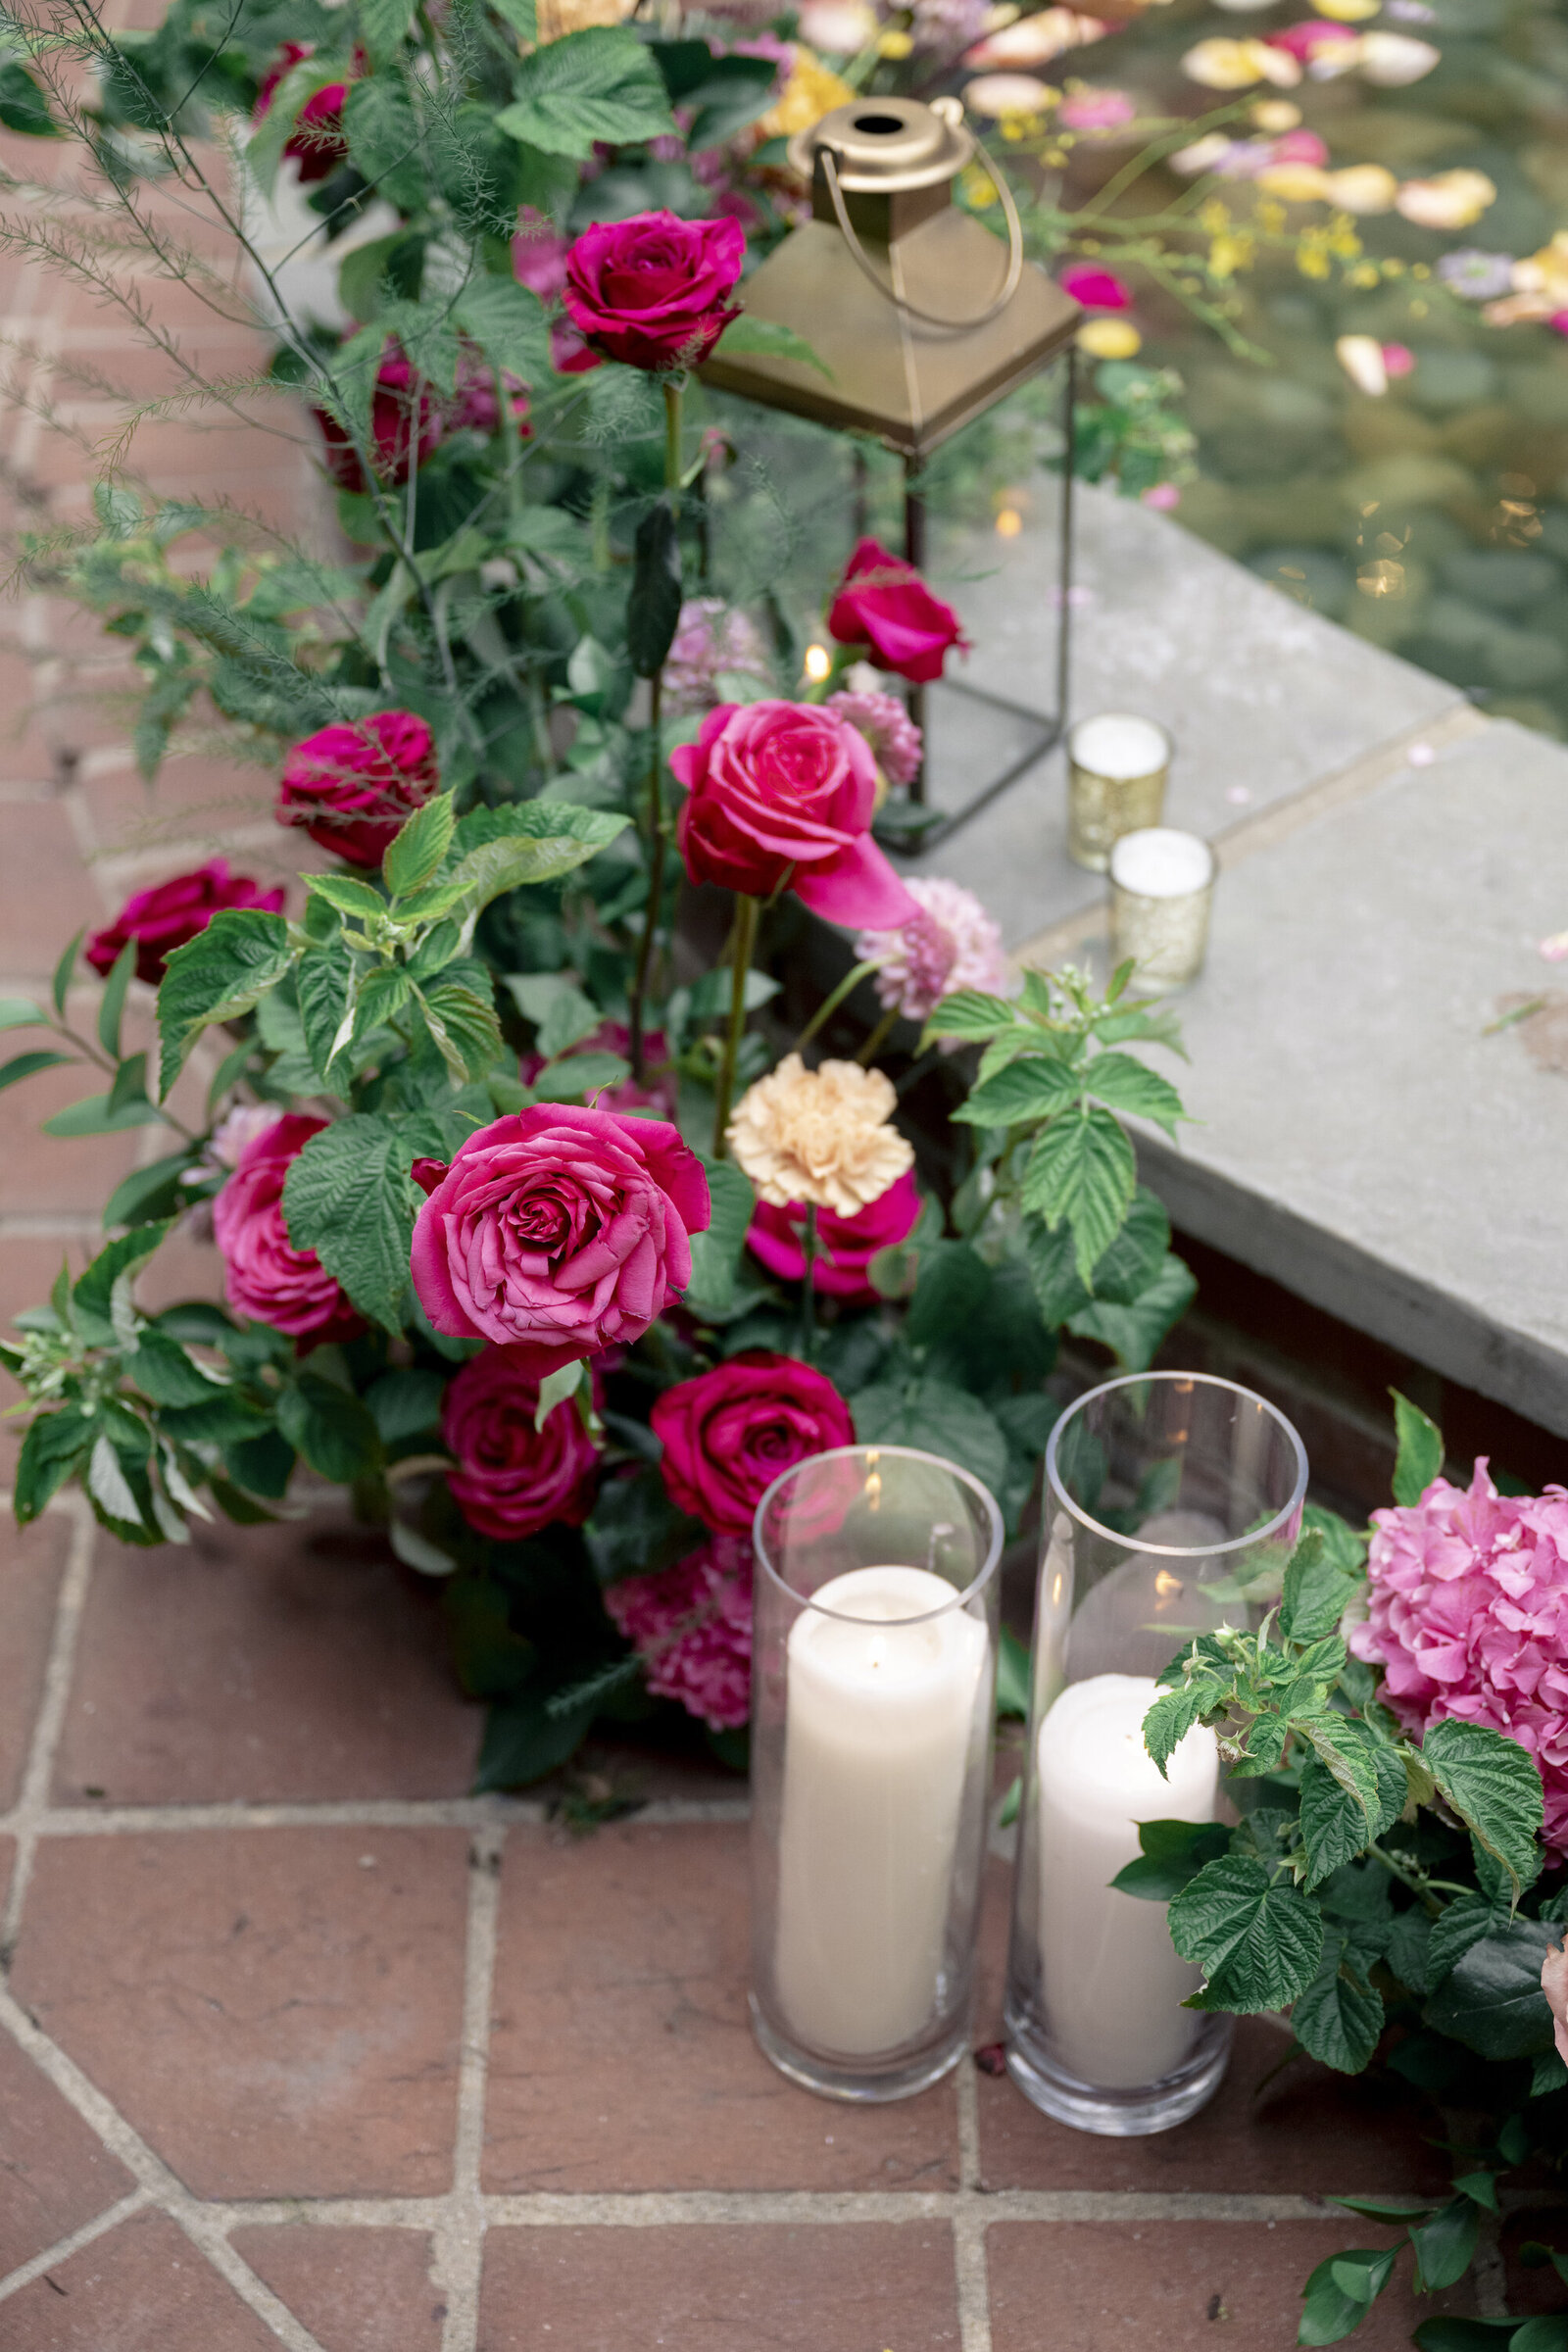 Close up of water fountain floral installation with hot pink roses, peach carnations, greenery and ivory pillar candles.